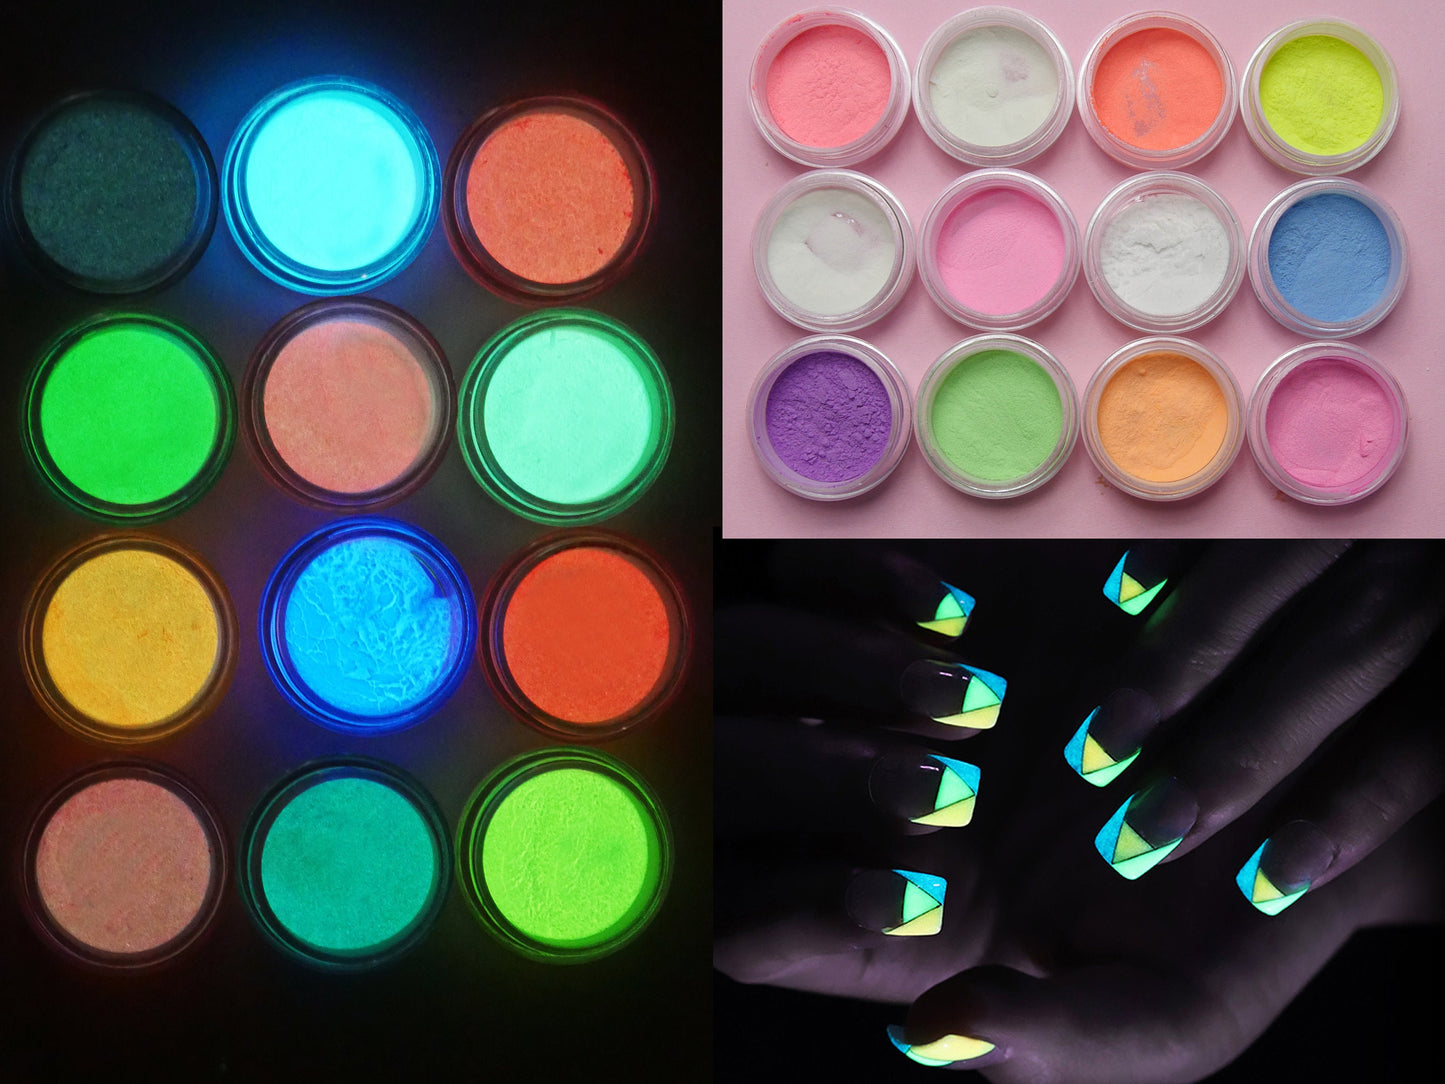 12 colors Neon Noctilucent Nail Flakes/ Glow In The Dark Powder Fluorescent Luminescent Nail Art Pigment/ Glowing nail art powders